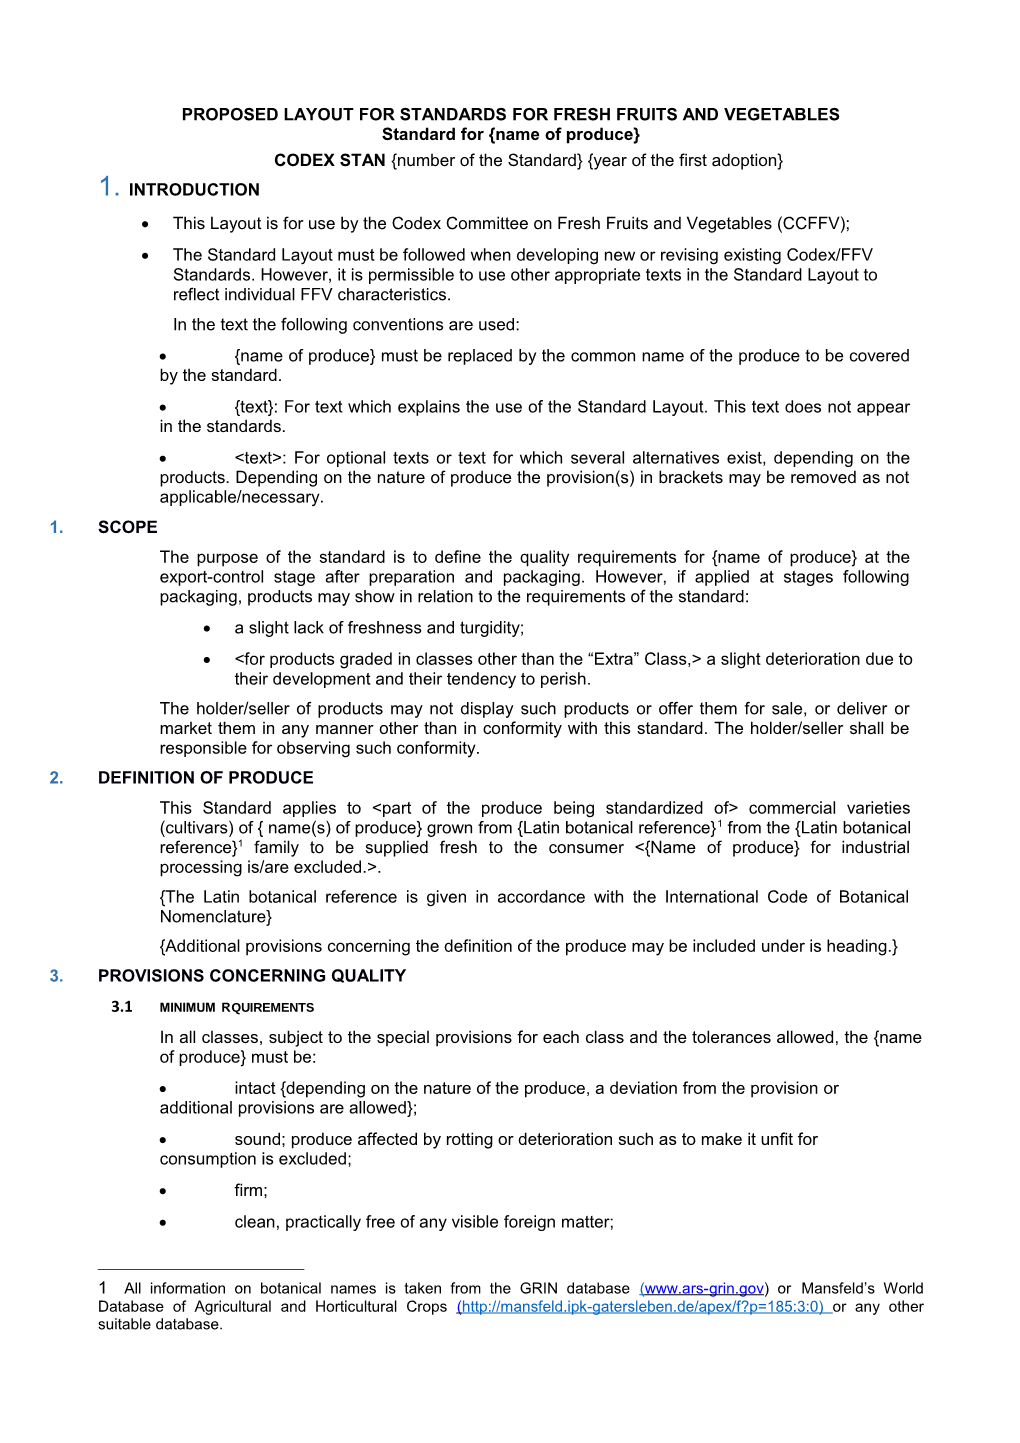 Request for Comments at Step 6 on the Draft Standard for Kiwifruit